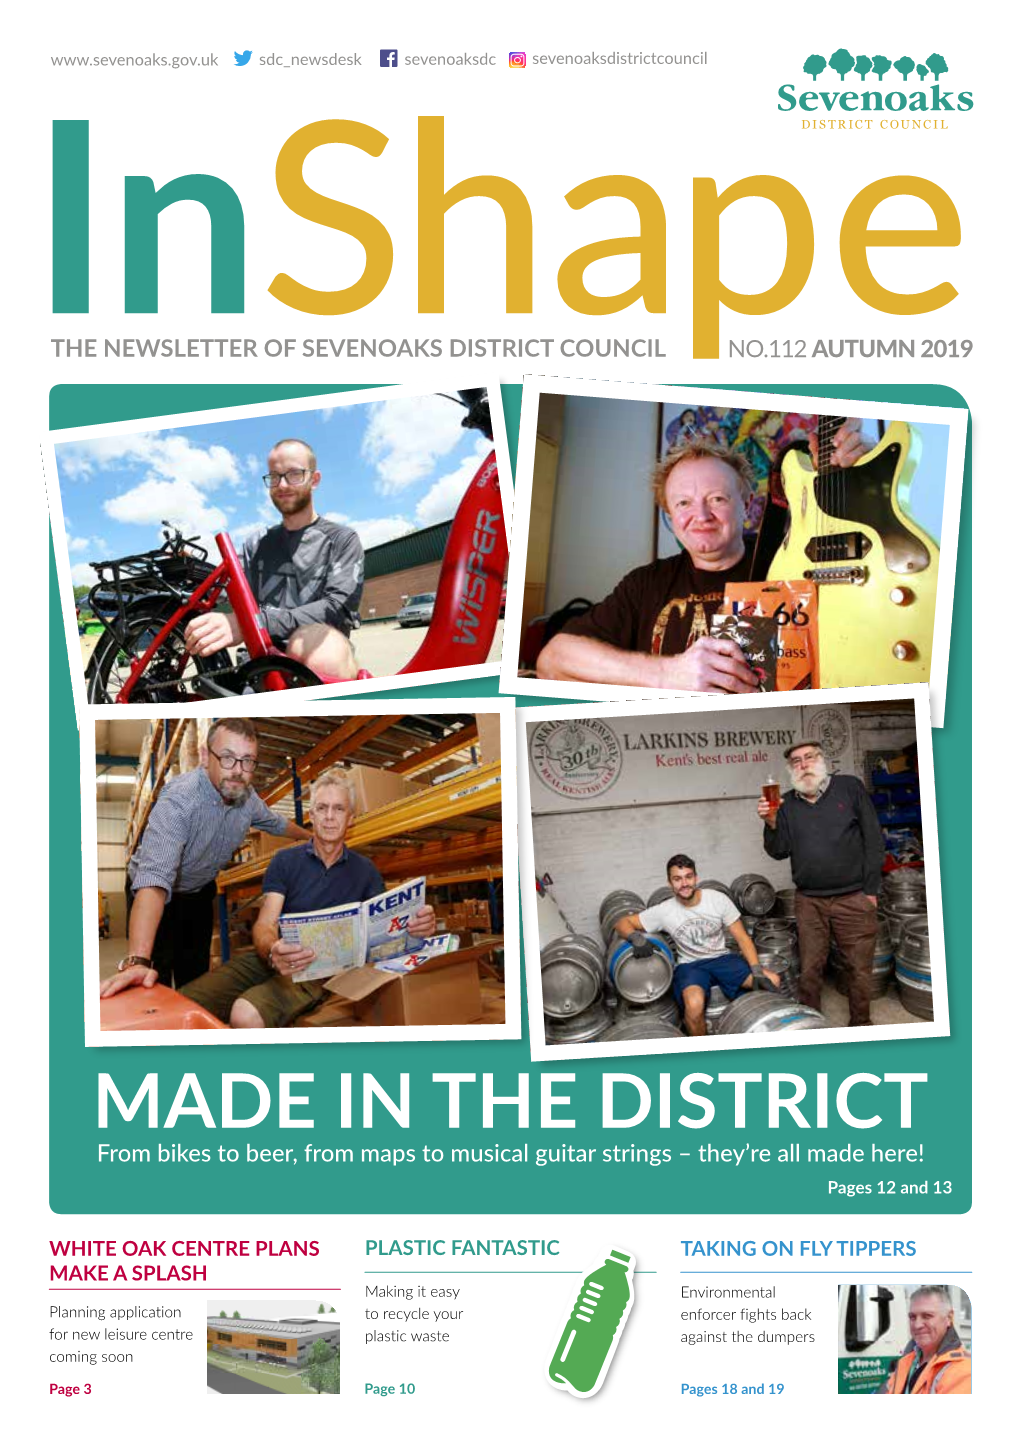 MADE in the DISTRICT from Bikes to Beer, from Maps to Musical Guitar Strings – They’Re All Made Here! Pages 12 and 13